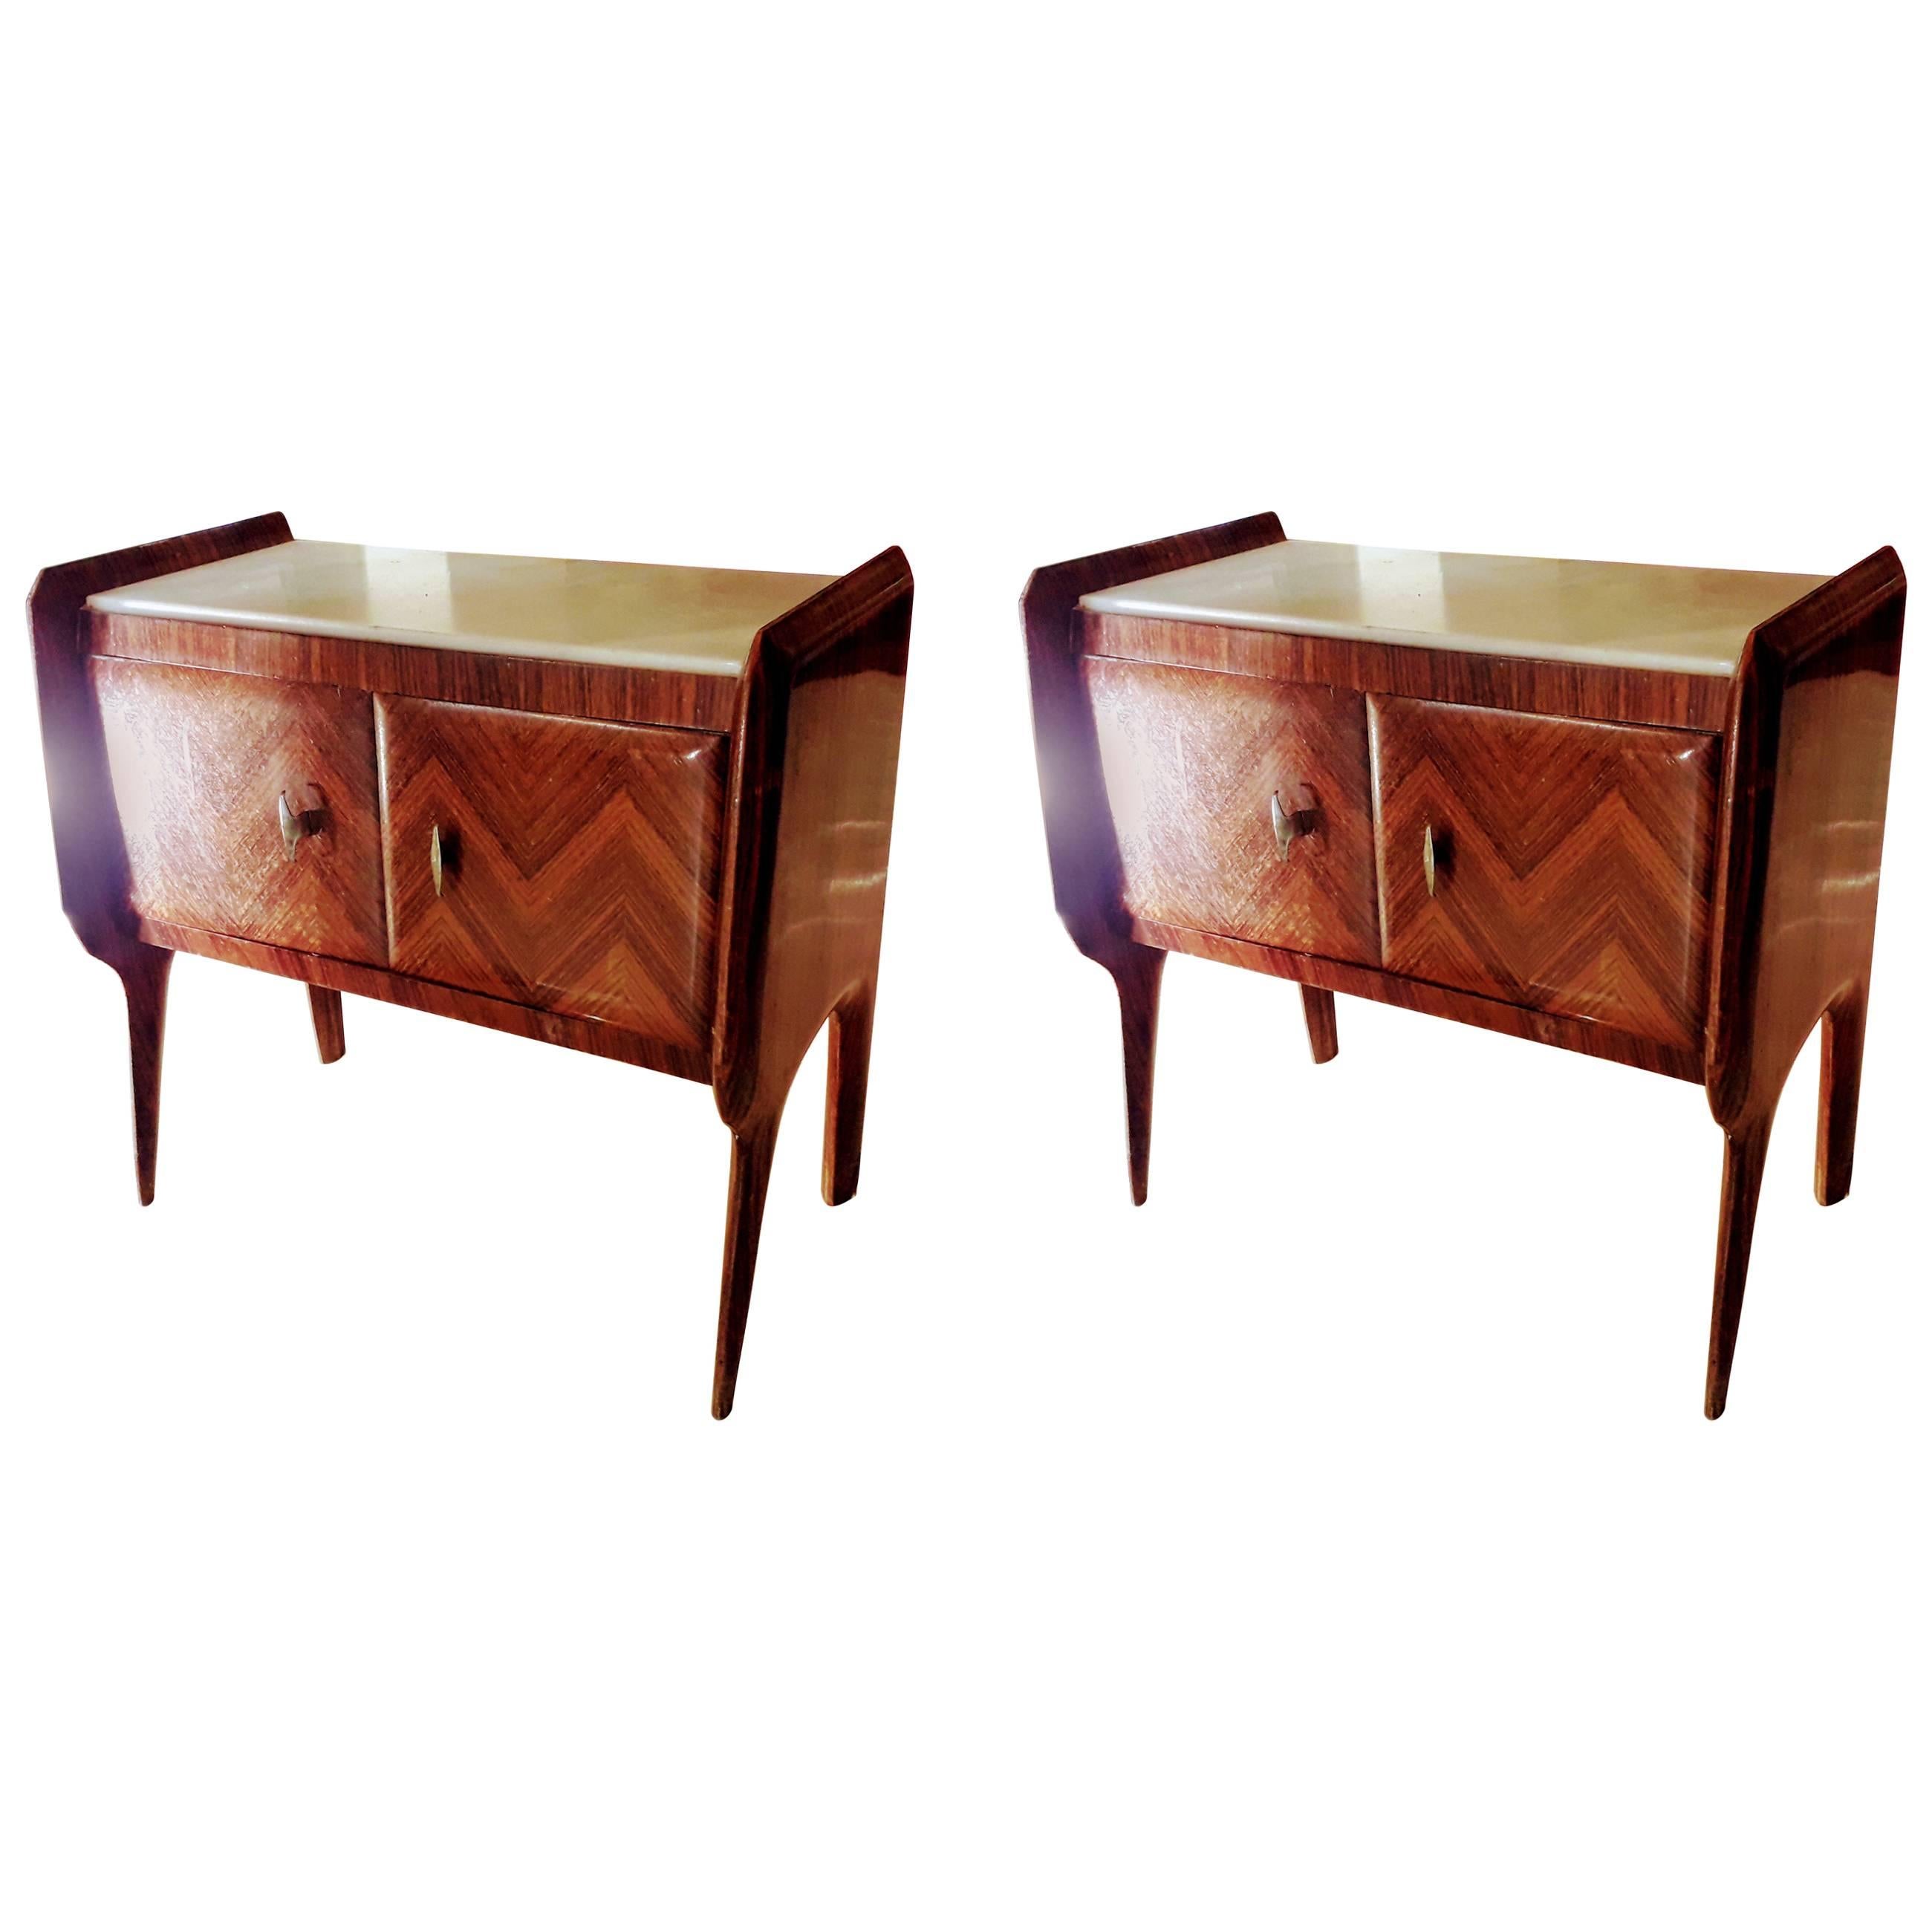 Pair of Wooden Bedside Tables, Vittorio Dassi, 1950